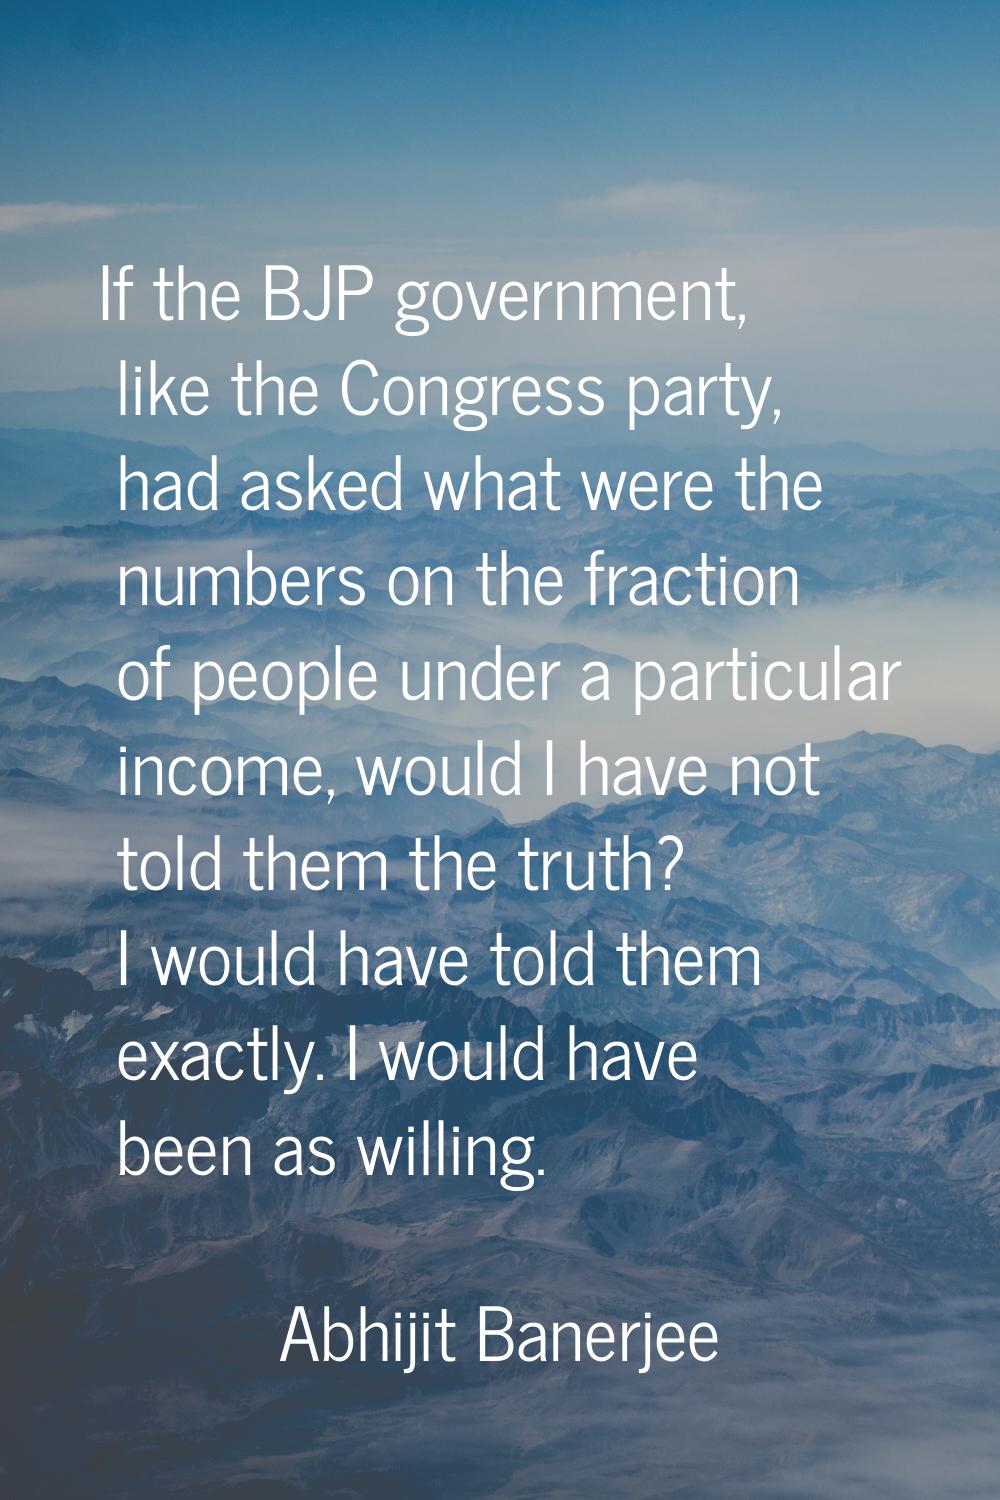 If the BJP government, like the Congress party, had asked what were the numbers on the fraction of 